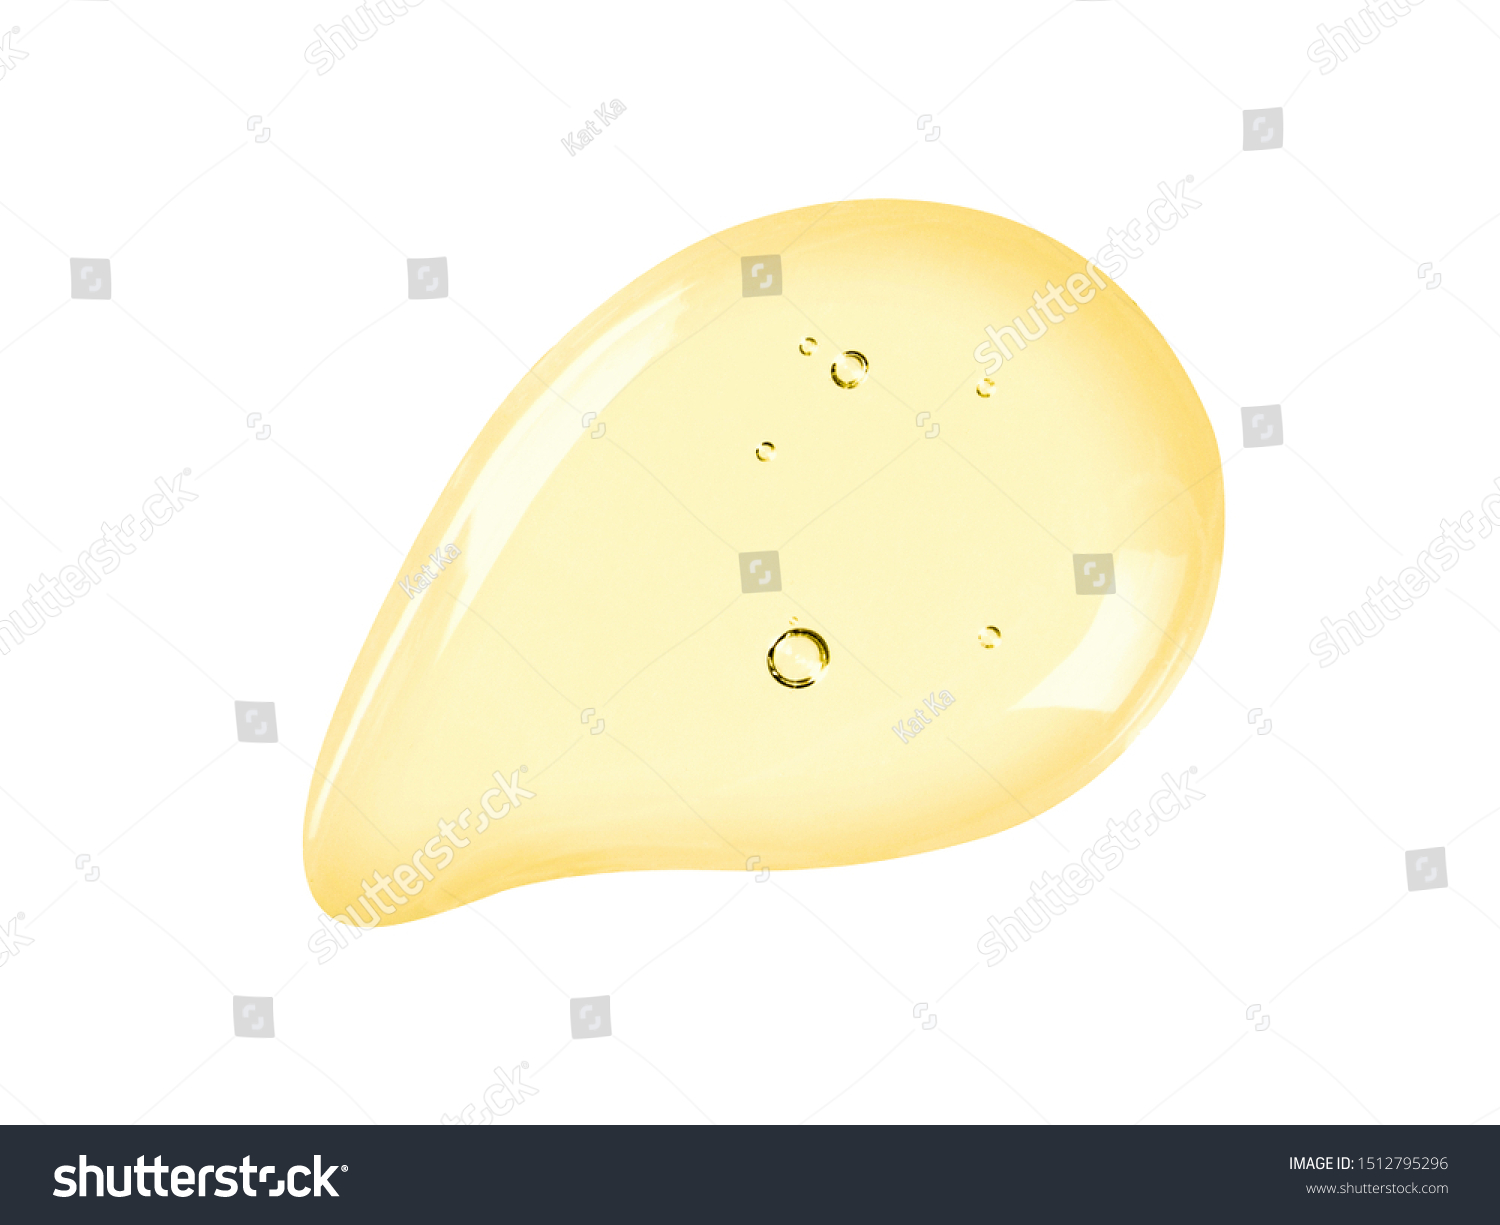 Serum texture. Face oil, liquid gel drop isolated on white background. Yellow colored cosmetic skincare product with bubbles swatch #1512795296